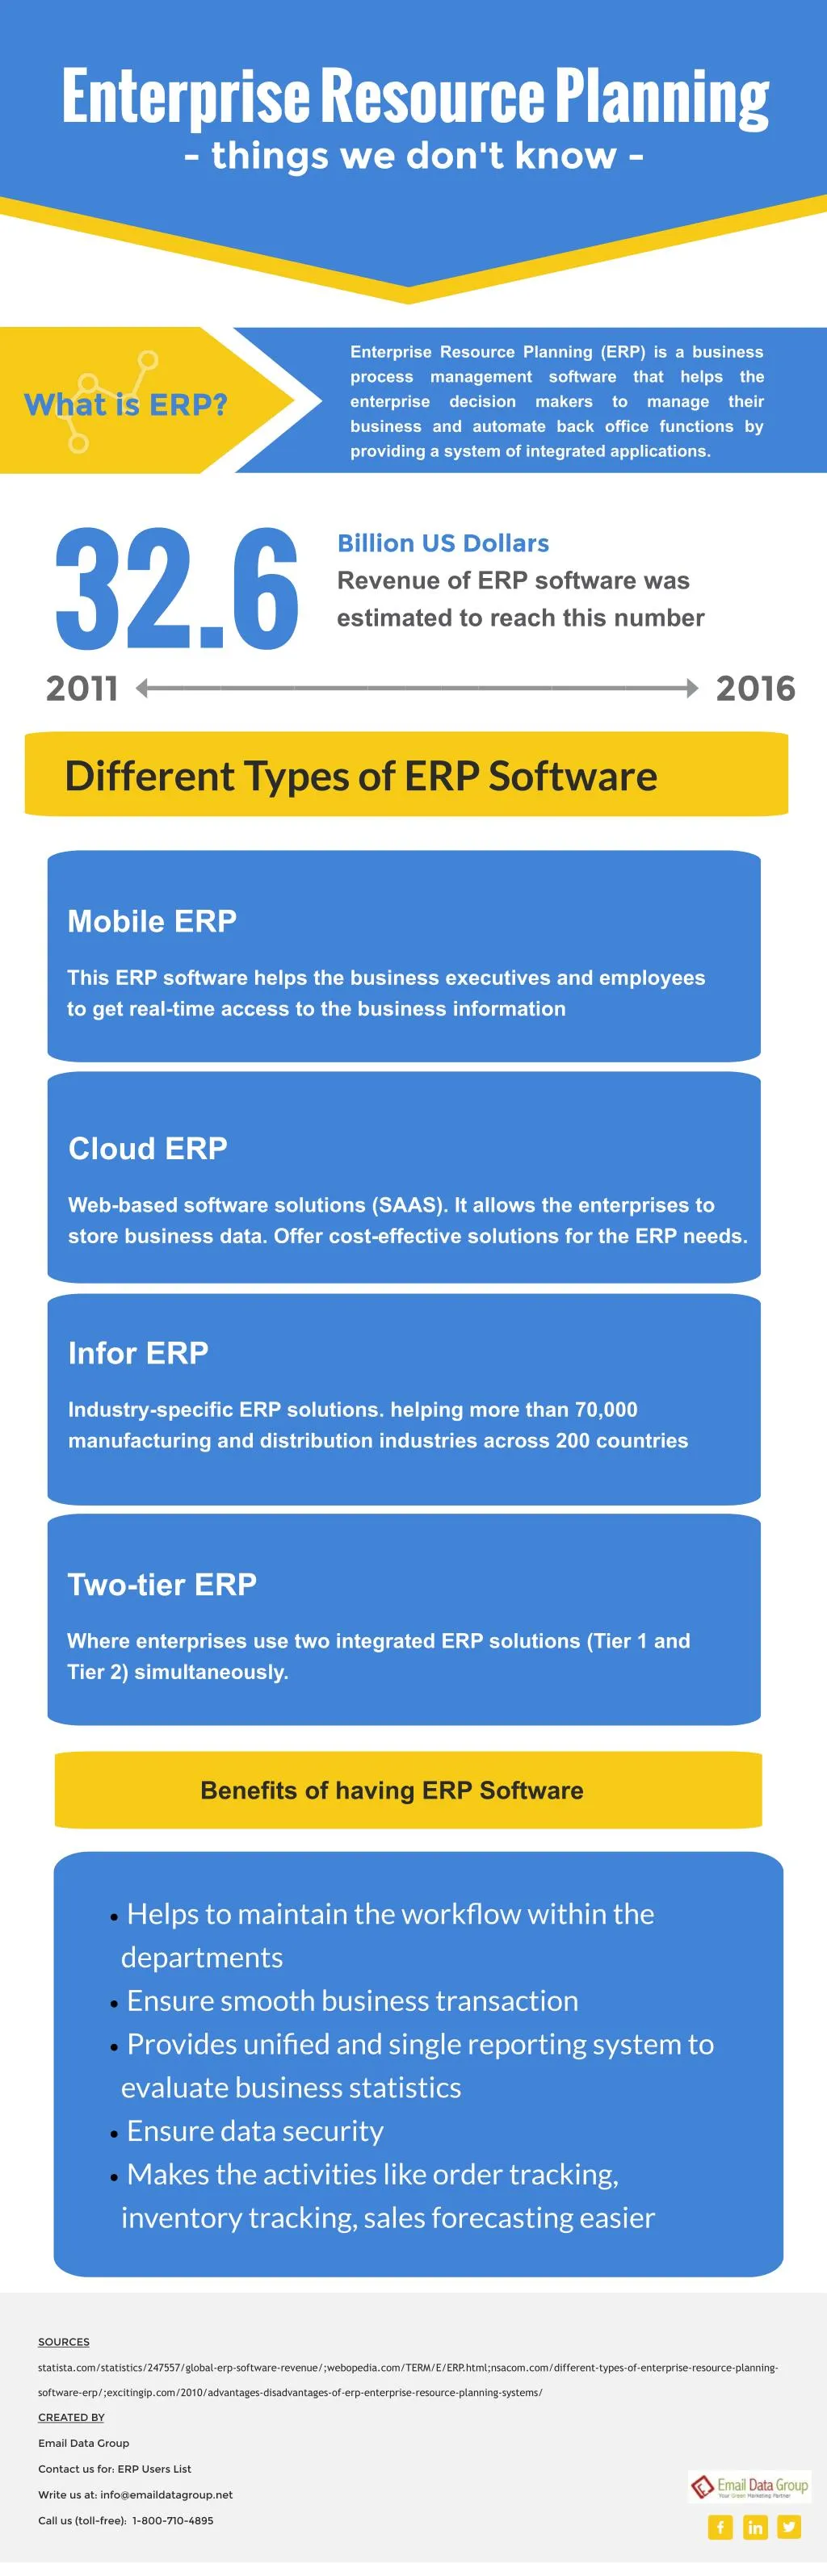 enterprise resource planning erp is a business